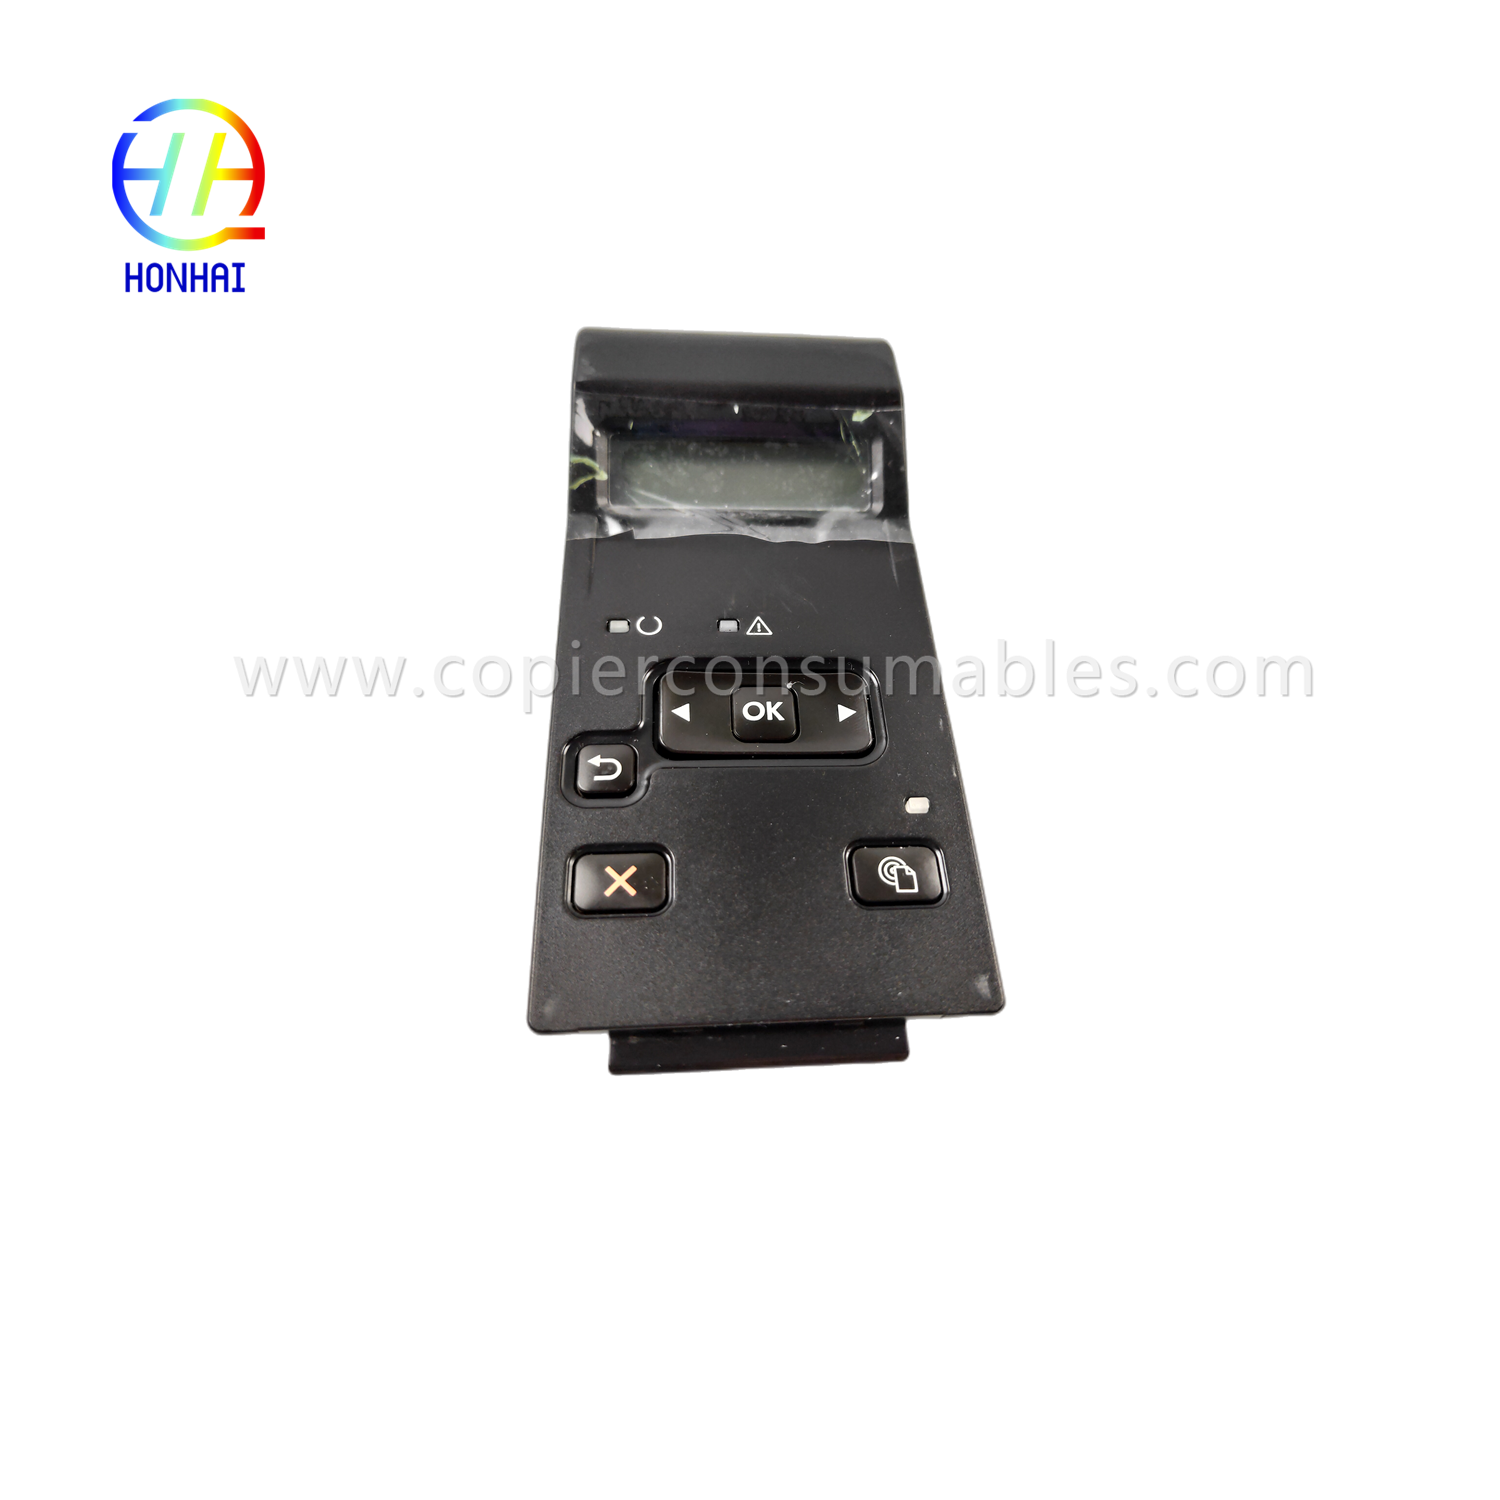 Control Panel Touch Screen  for HP LaserJet 400 M401d M401dn M401n M401 m401 401d 401dn 401n (1)